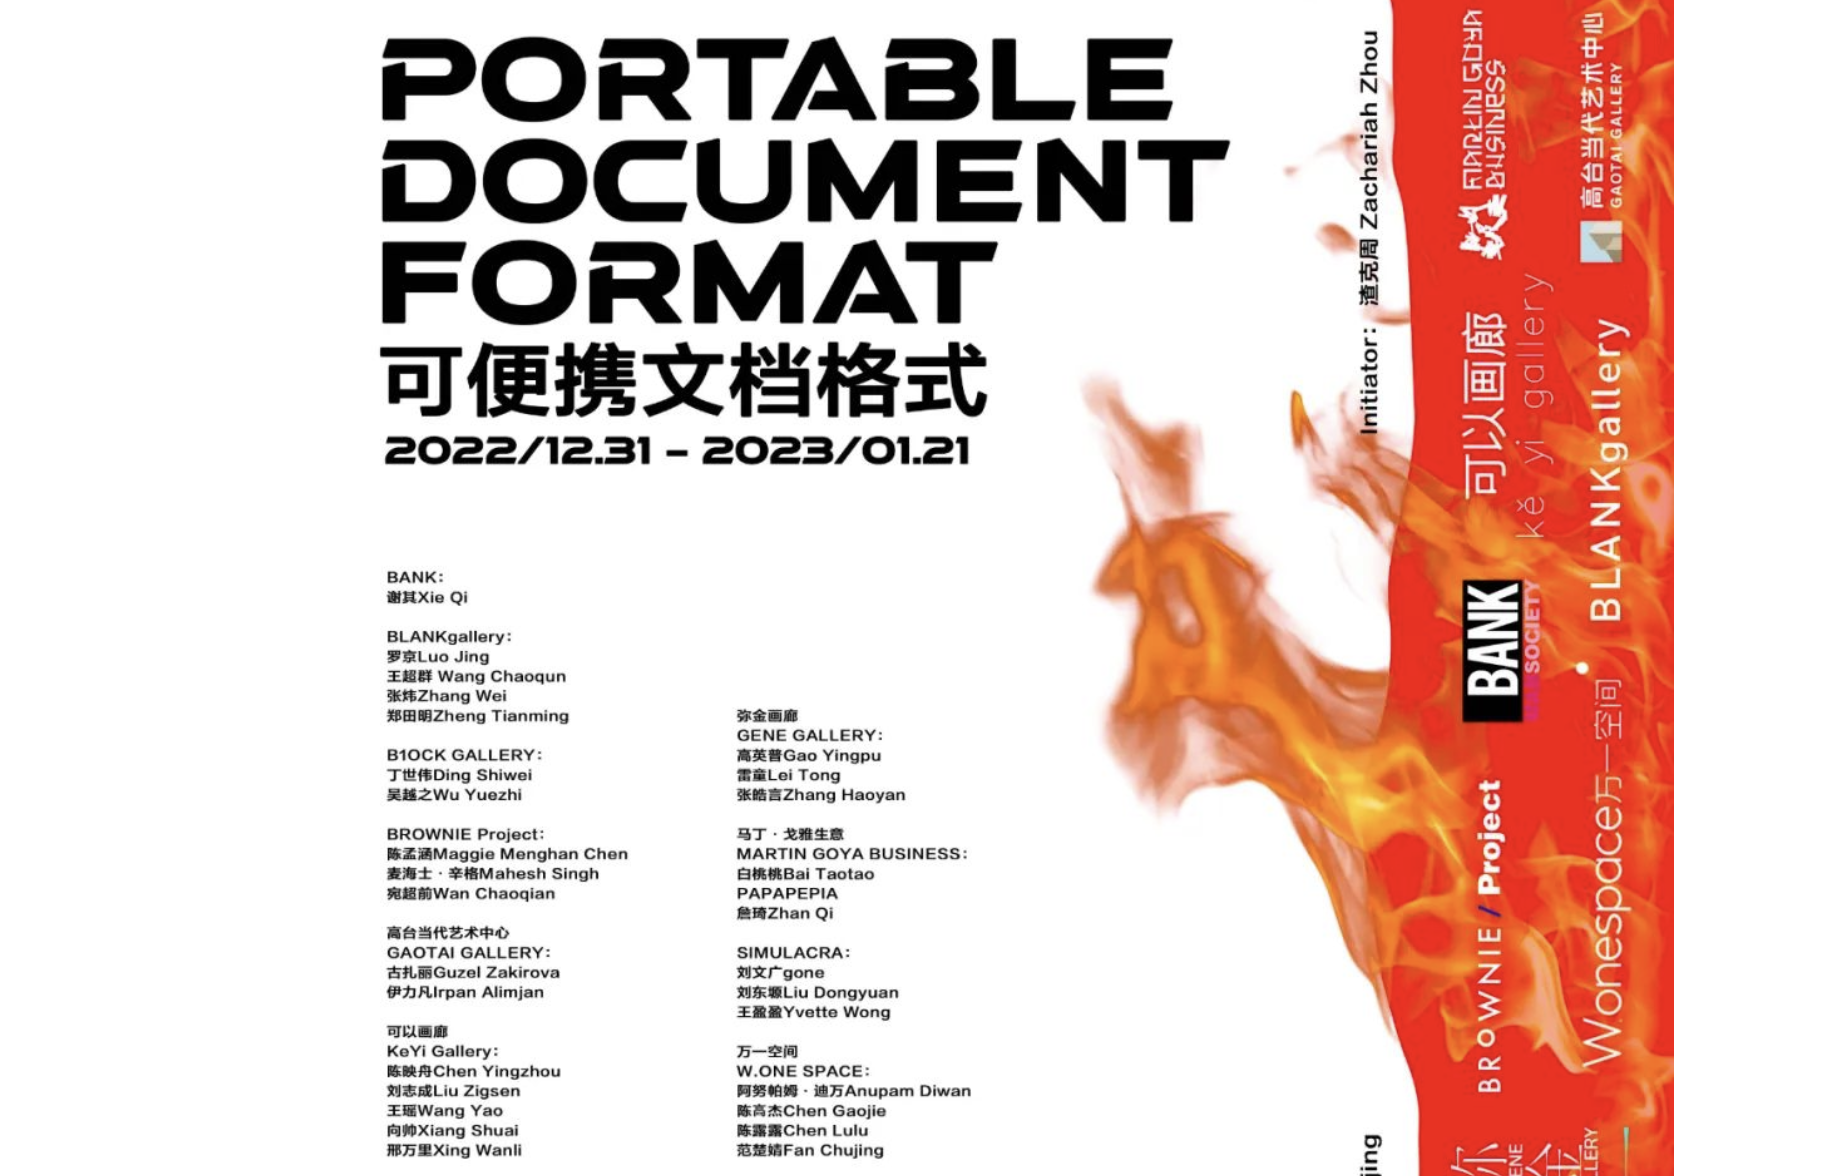 Guzel Zakirova and Irpan Alimjan Presented in Group Exhibition Portable Document Format by SIMULACRA